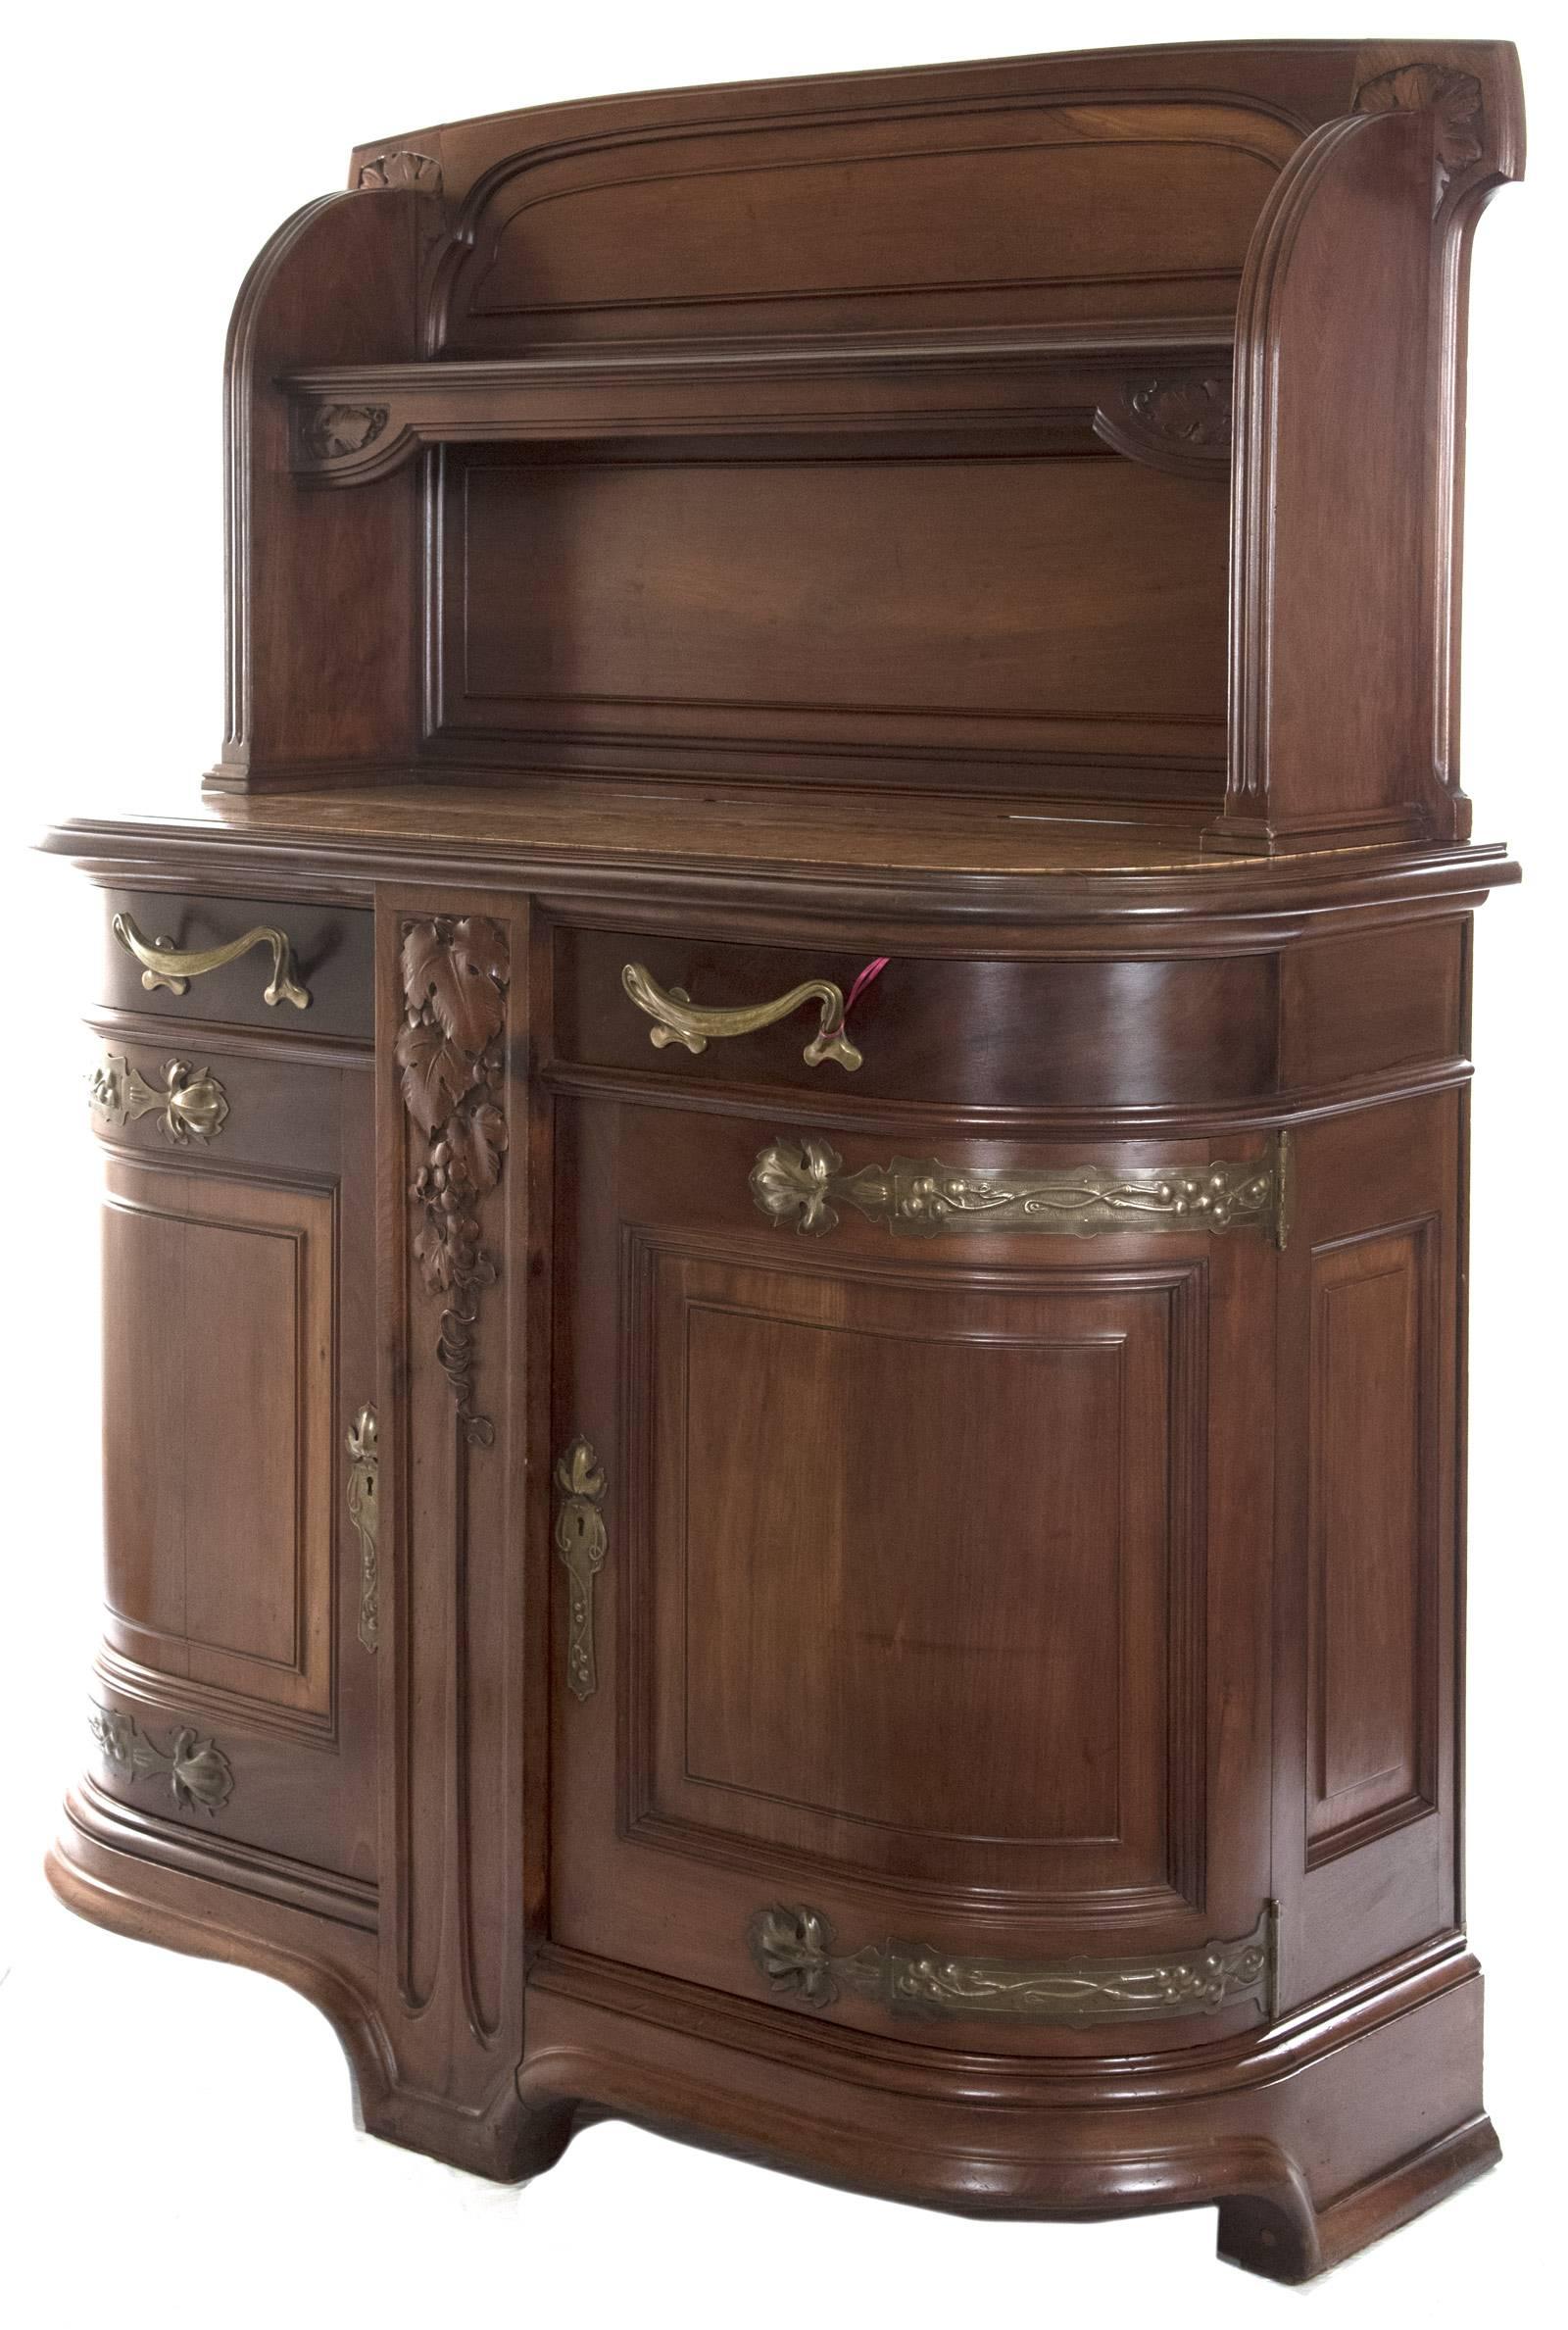 A French Art Nouveau mahogany sideboard in the style of Louis Majorelle in the early 20th century. An open shelf decorated with leaf motifs is raised between two curved side panels, above a marble-inset top with a stepped edge above a base of